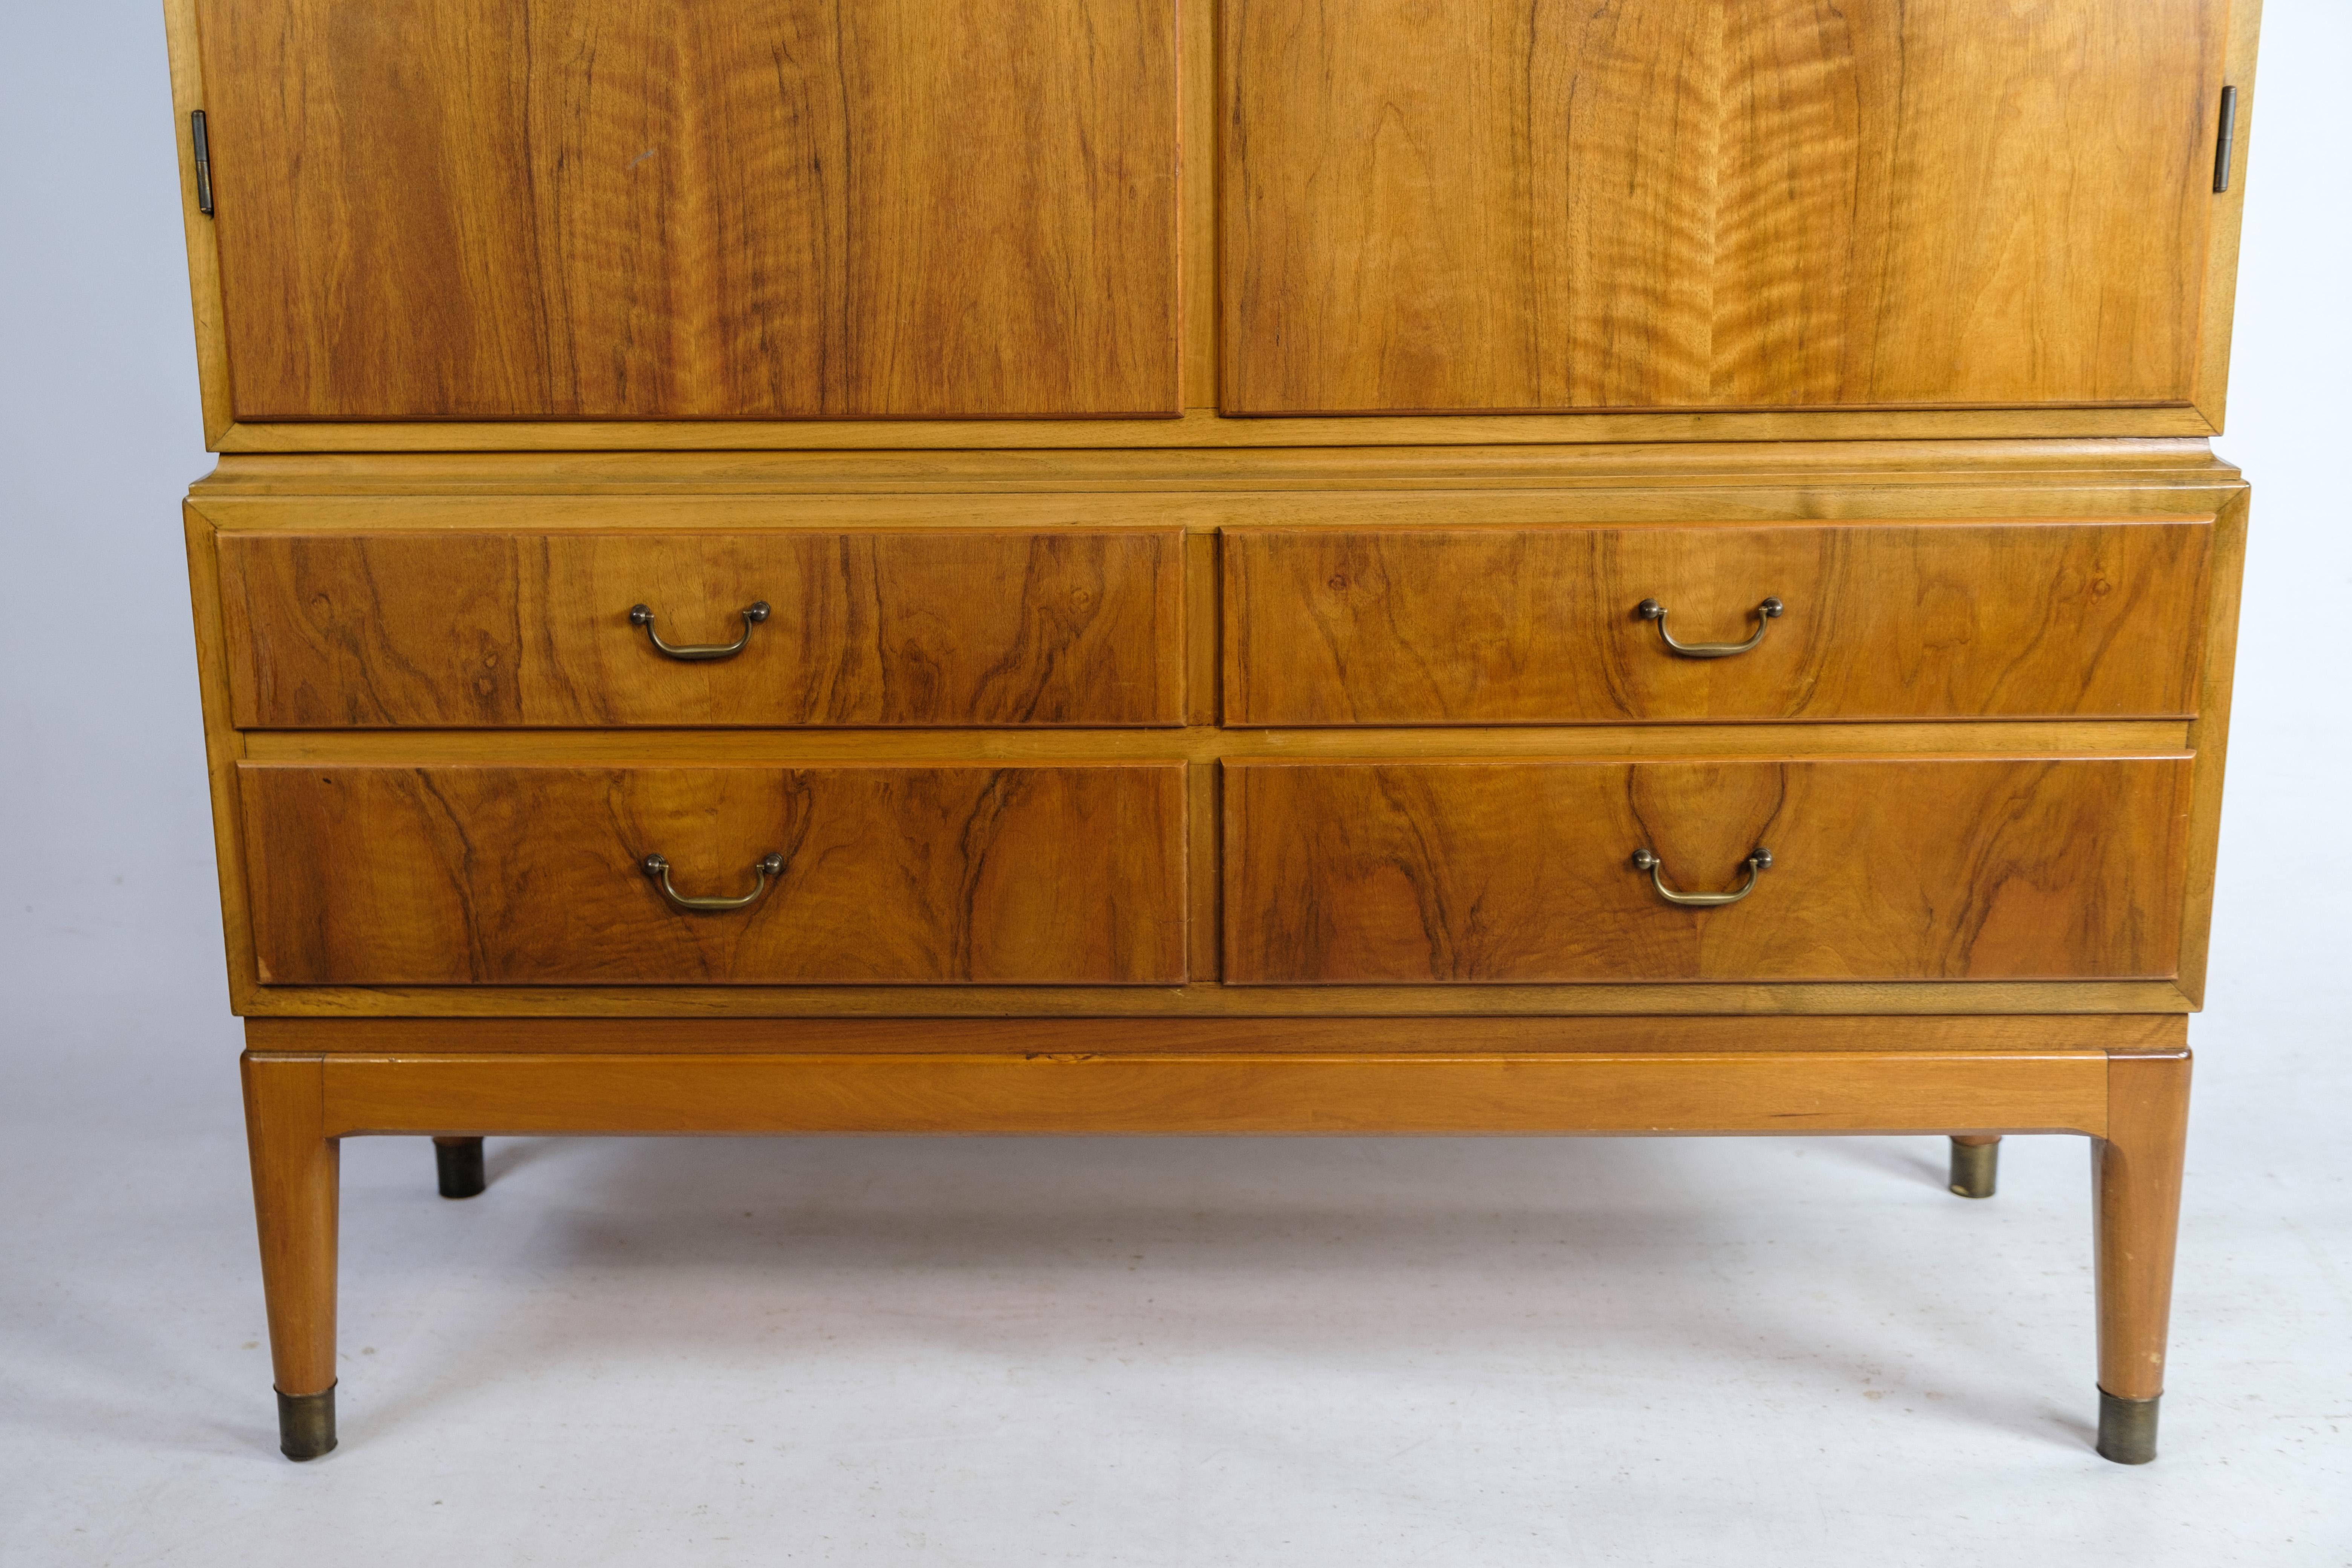 Cutlery Cabinet Made In Light Walnut By Danish Carpenter From 1940s In Good Condition For Sale In Lejre, DK